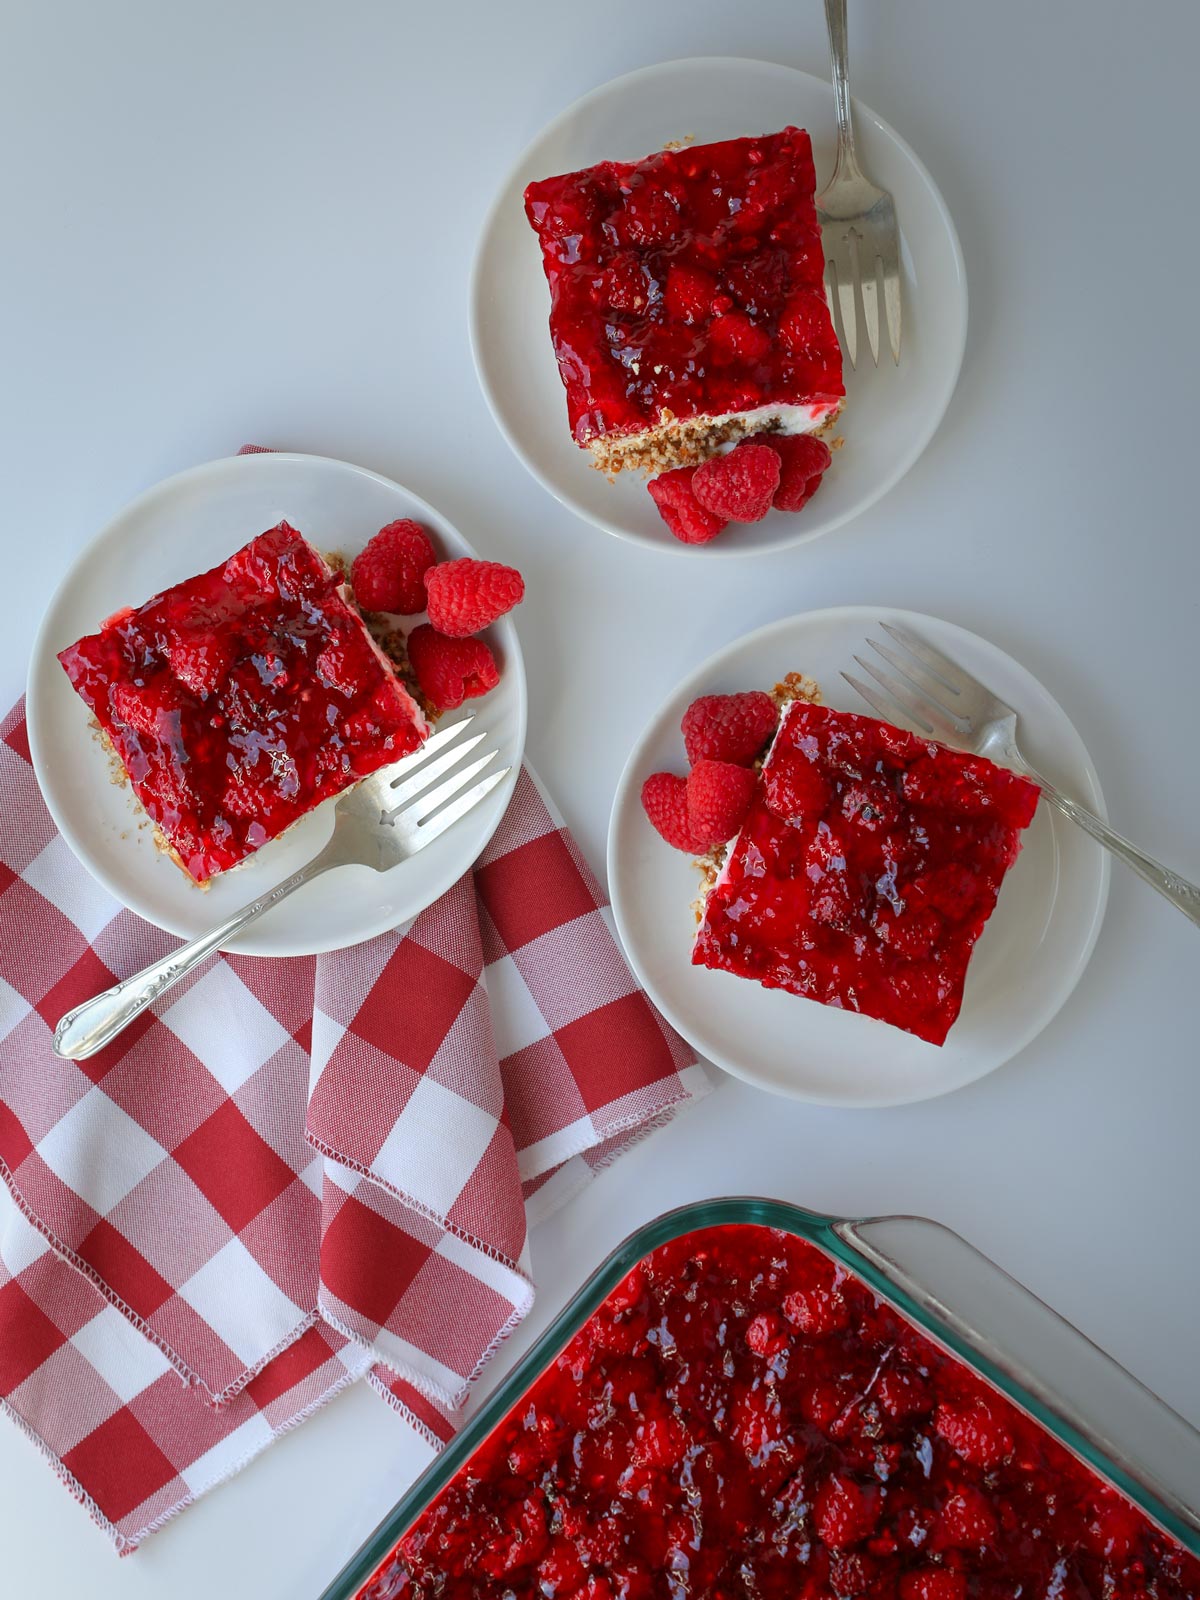 array of jello dessert squares on plates with red checked napkin.